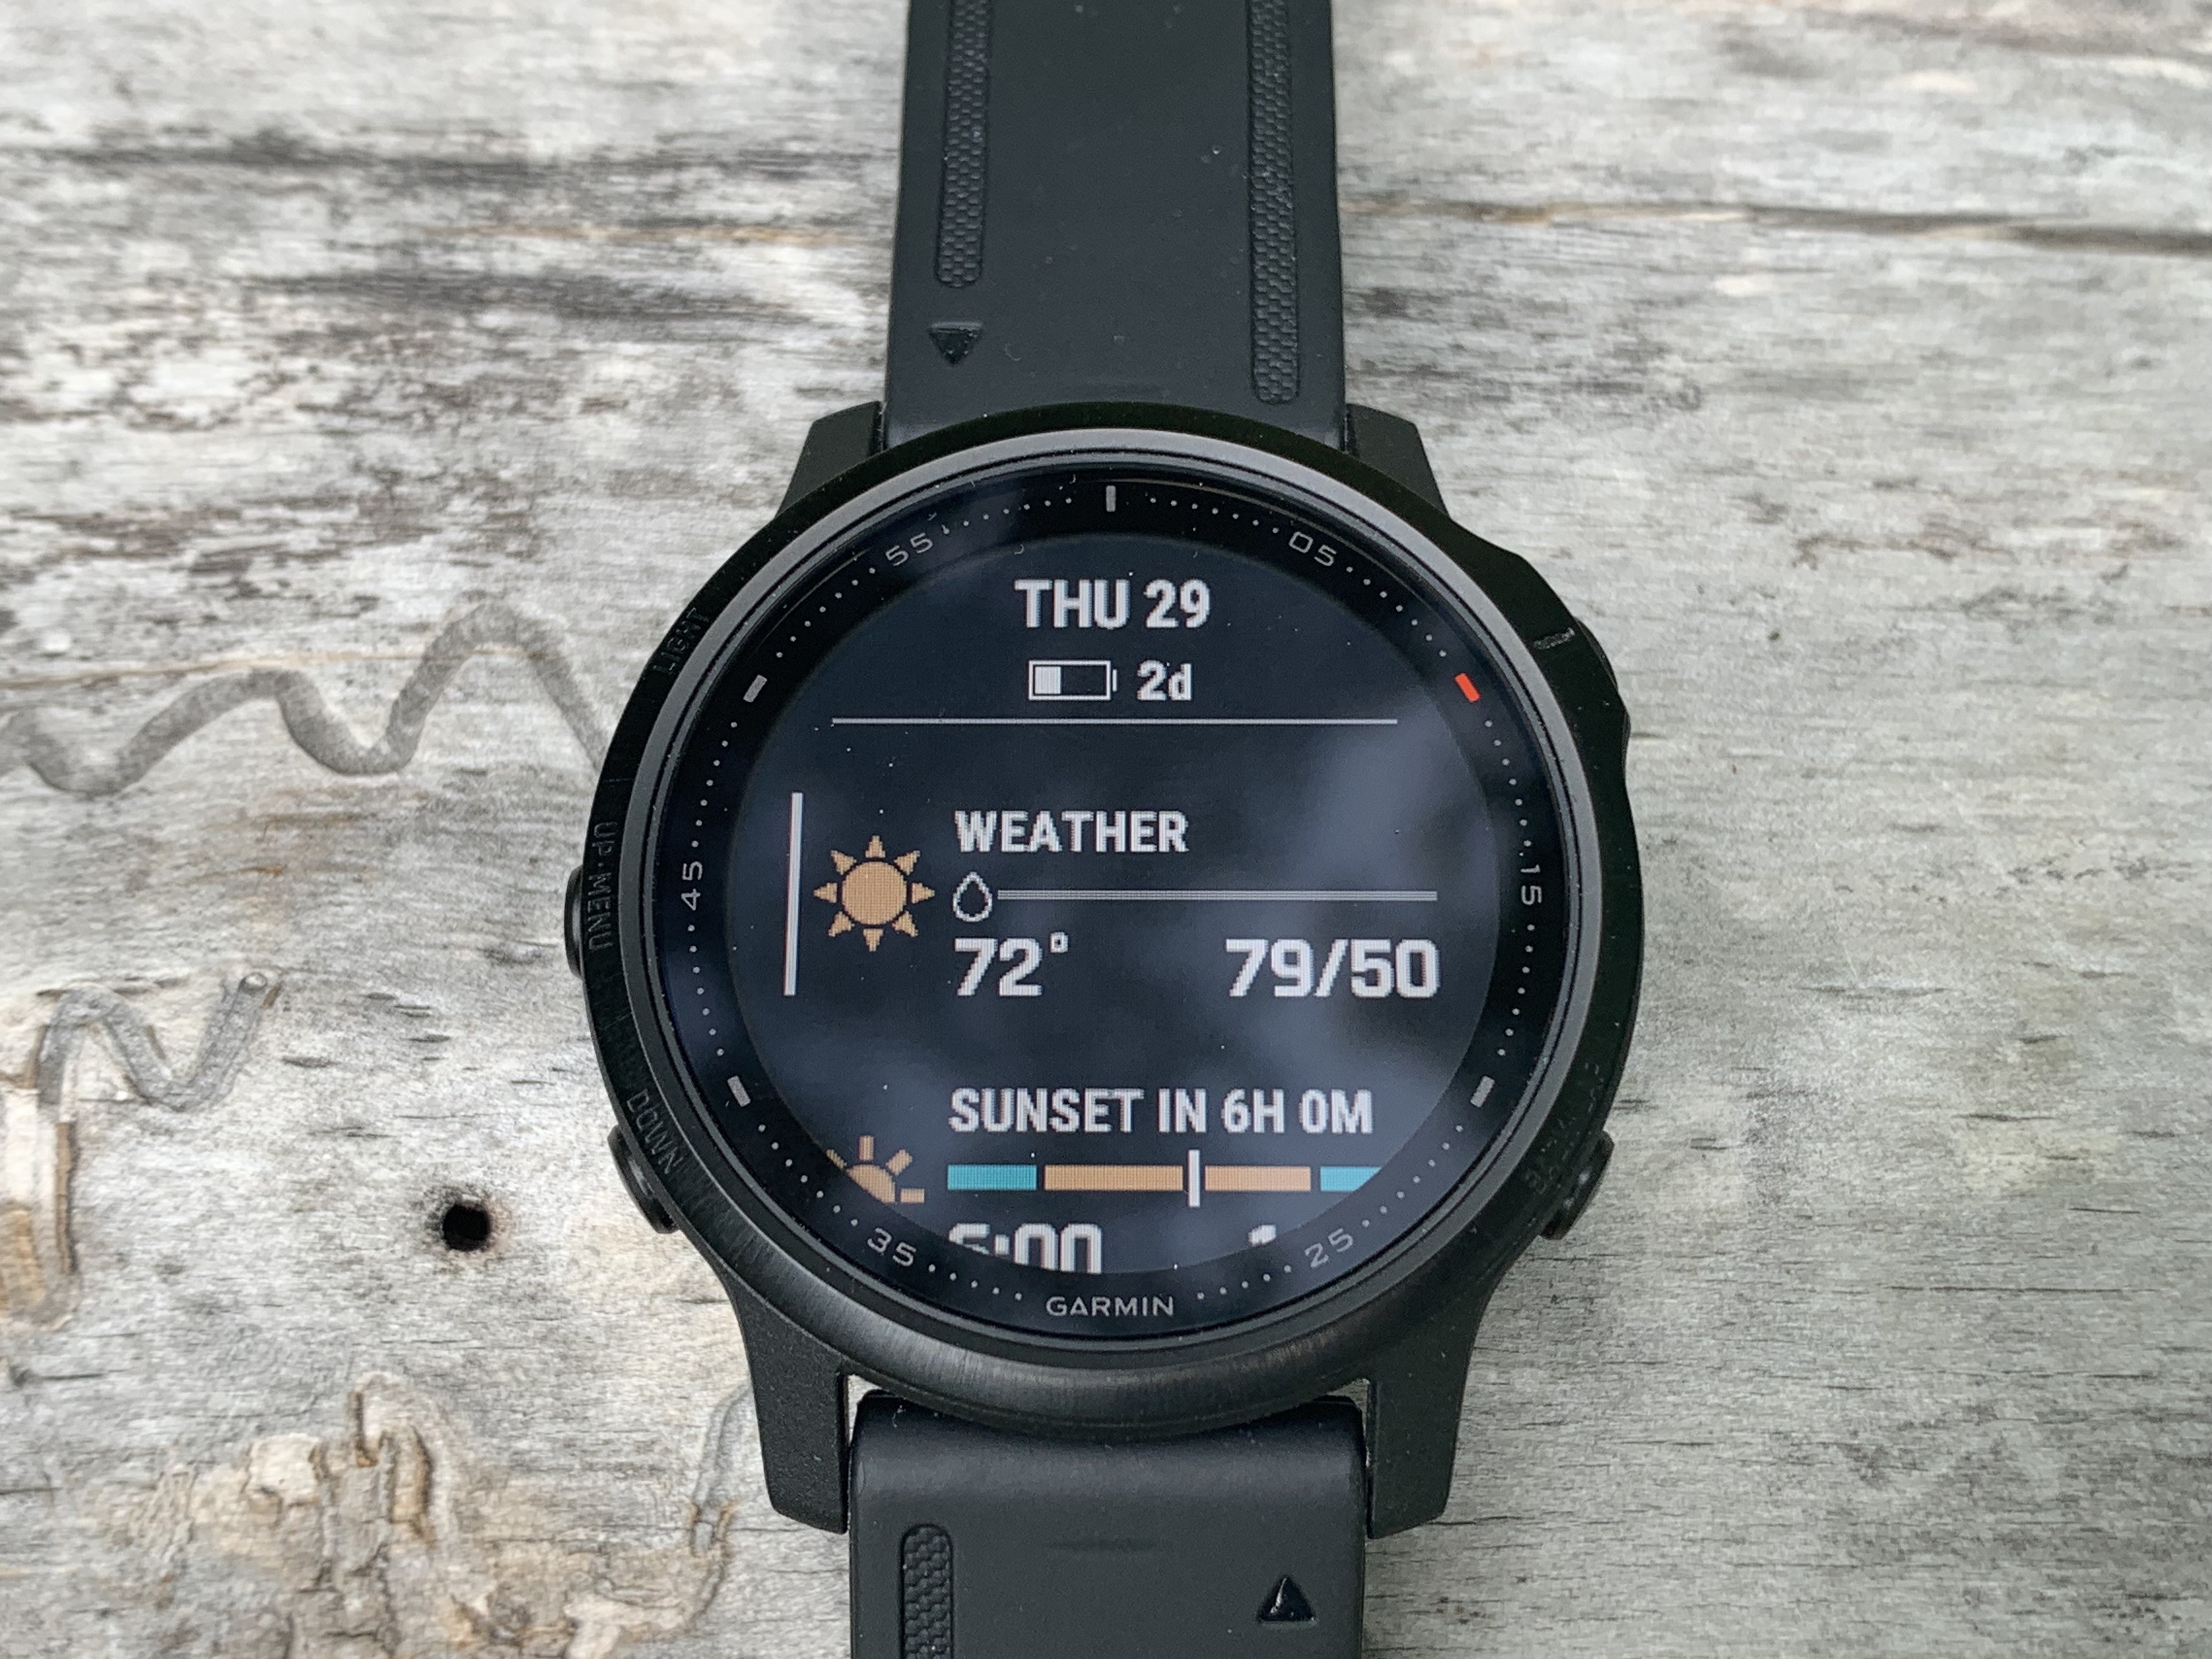 Garmin Fenix Pro Review: A Small Watch With A Big Punch | Digital Trends